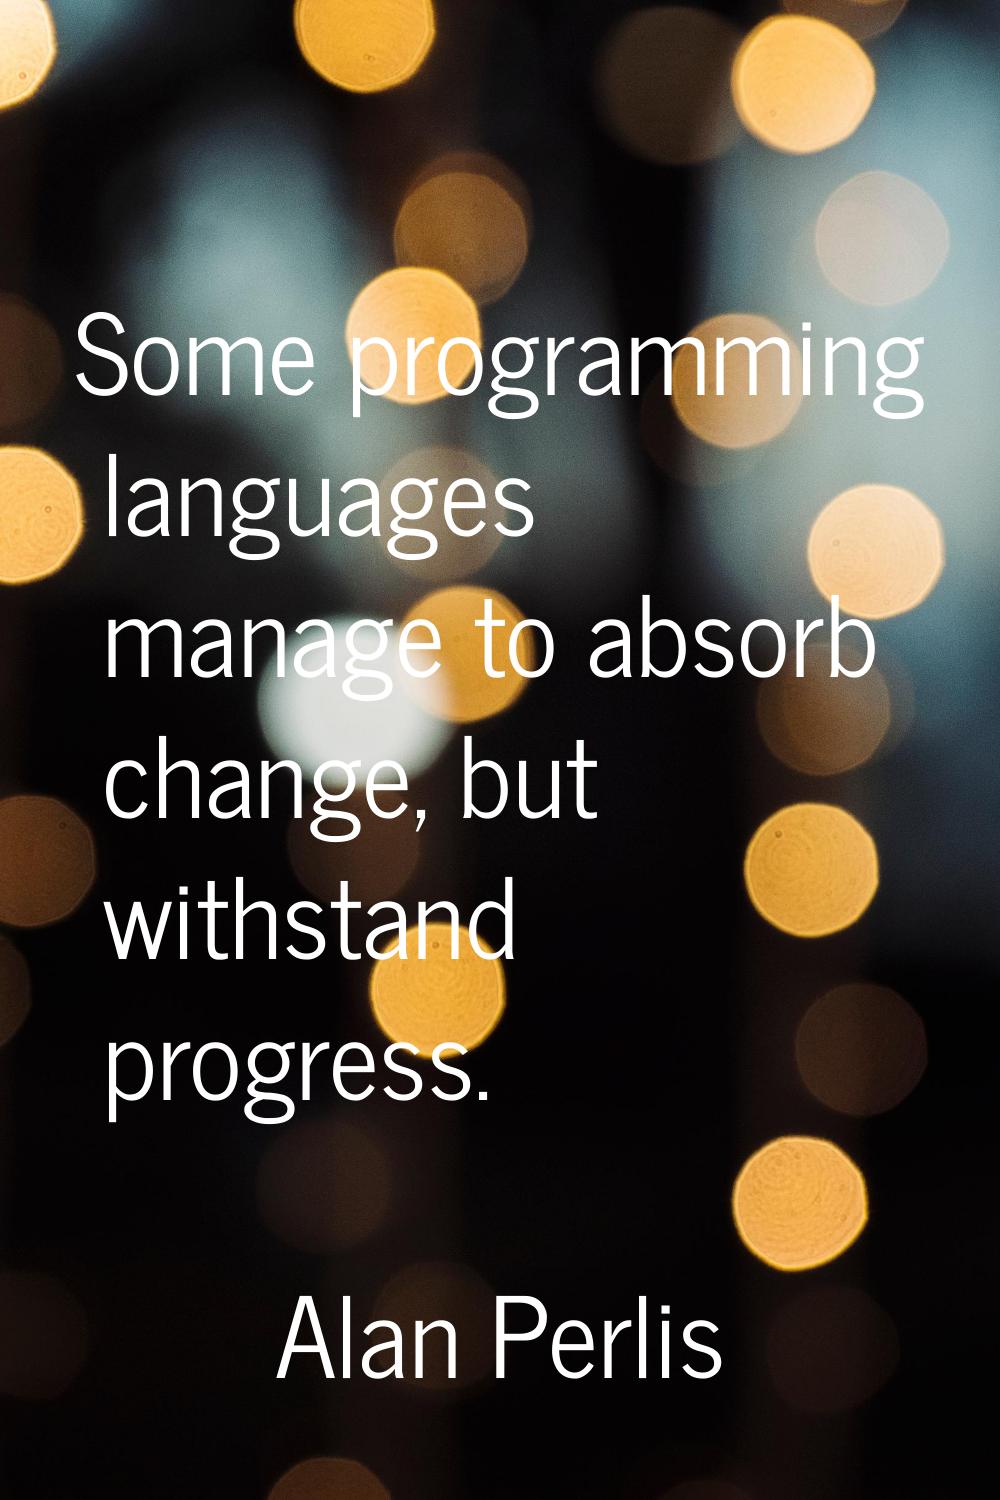 Some programming languages manage to absorb change, but withstand progress.